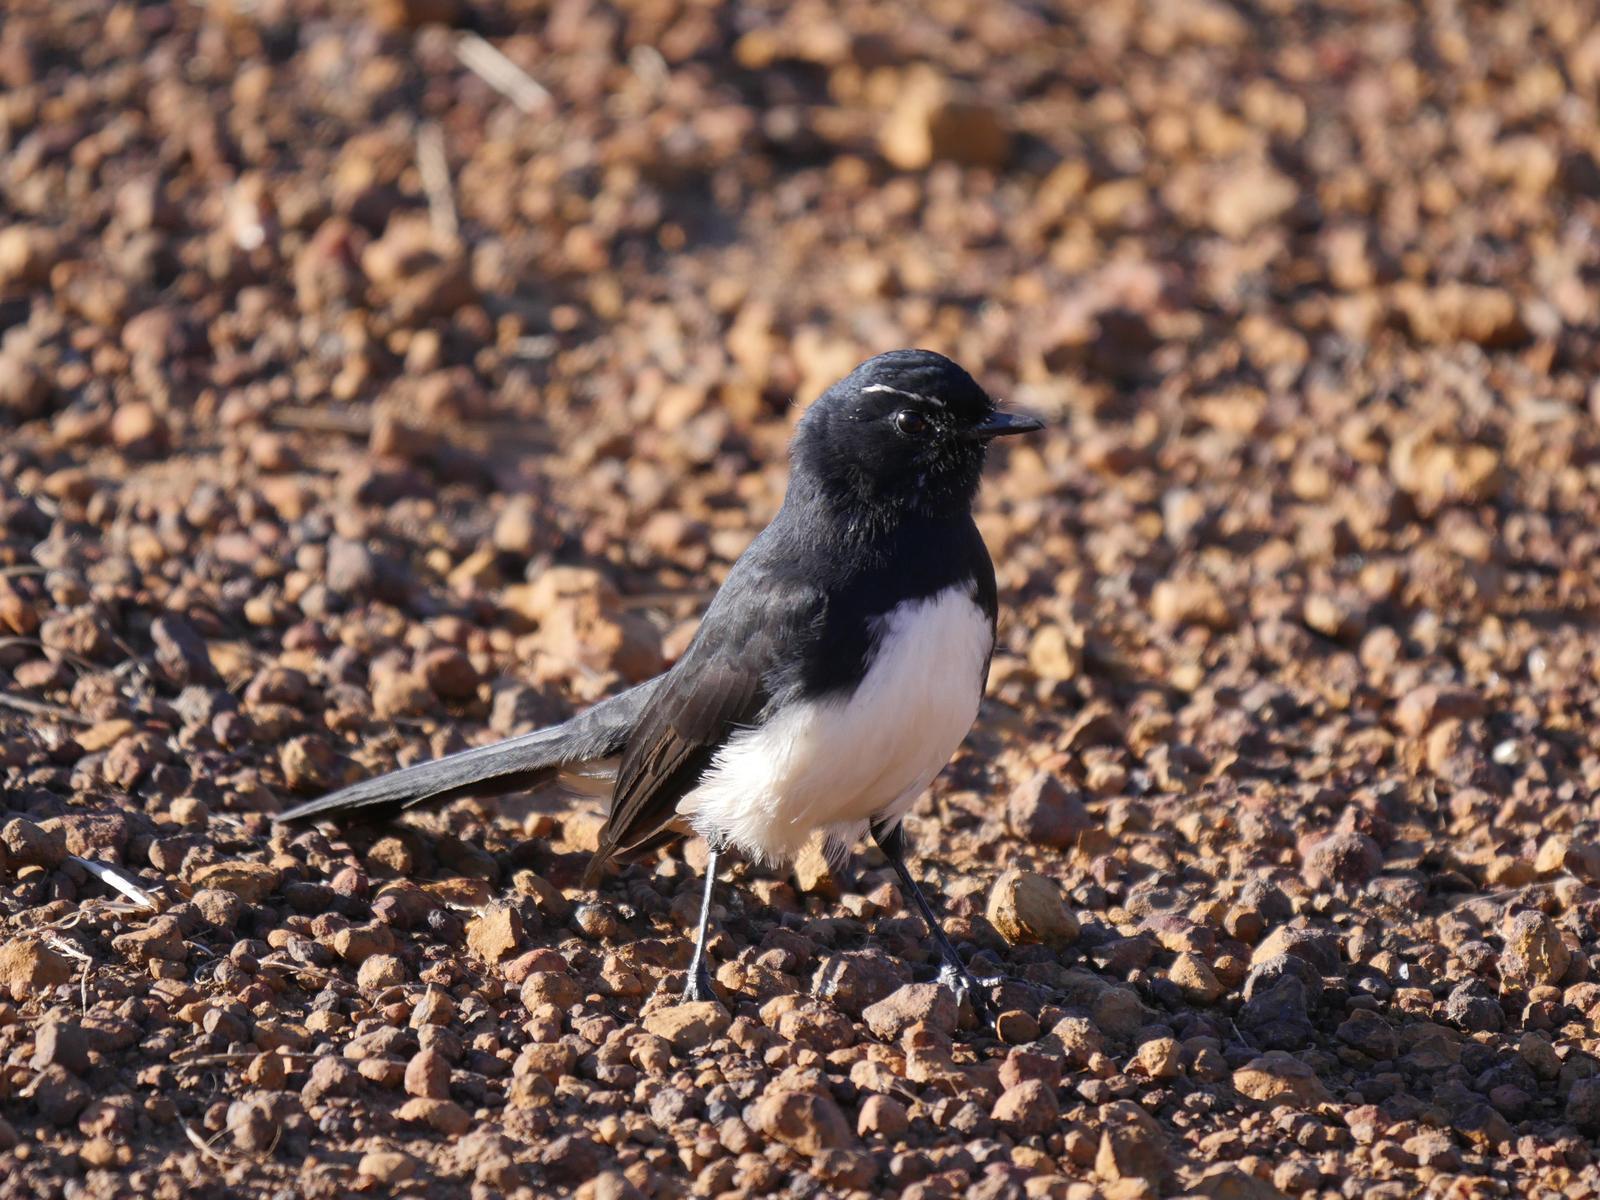 Willie-wagtail Photo by Peter Lowe